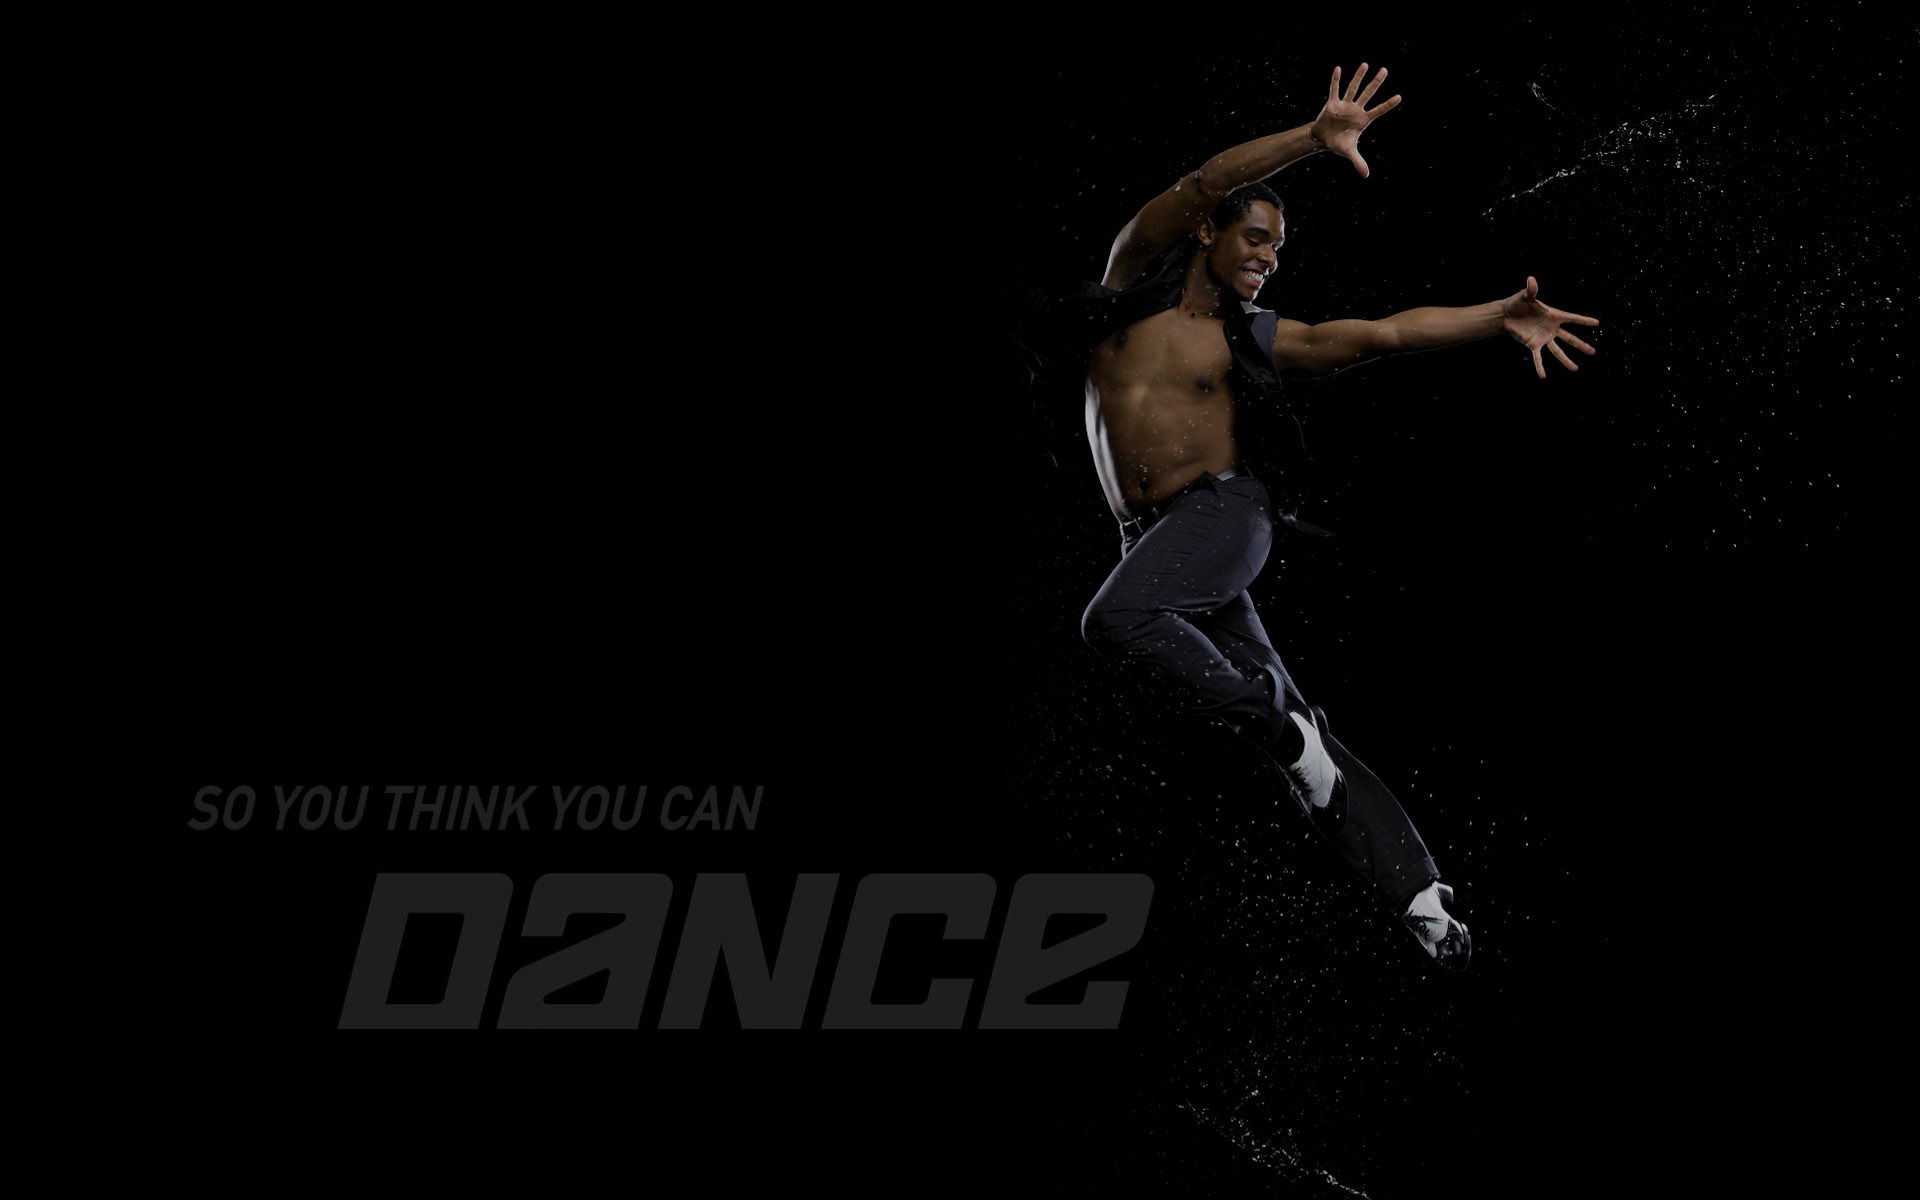 So You Think You Can Dance 舞林爭霸壁紙(二) #20 - 1920x1200